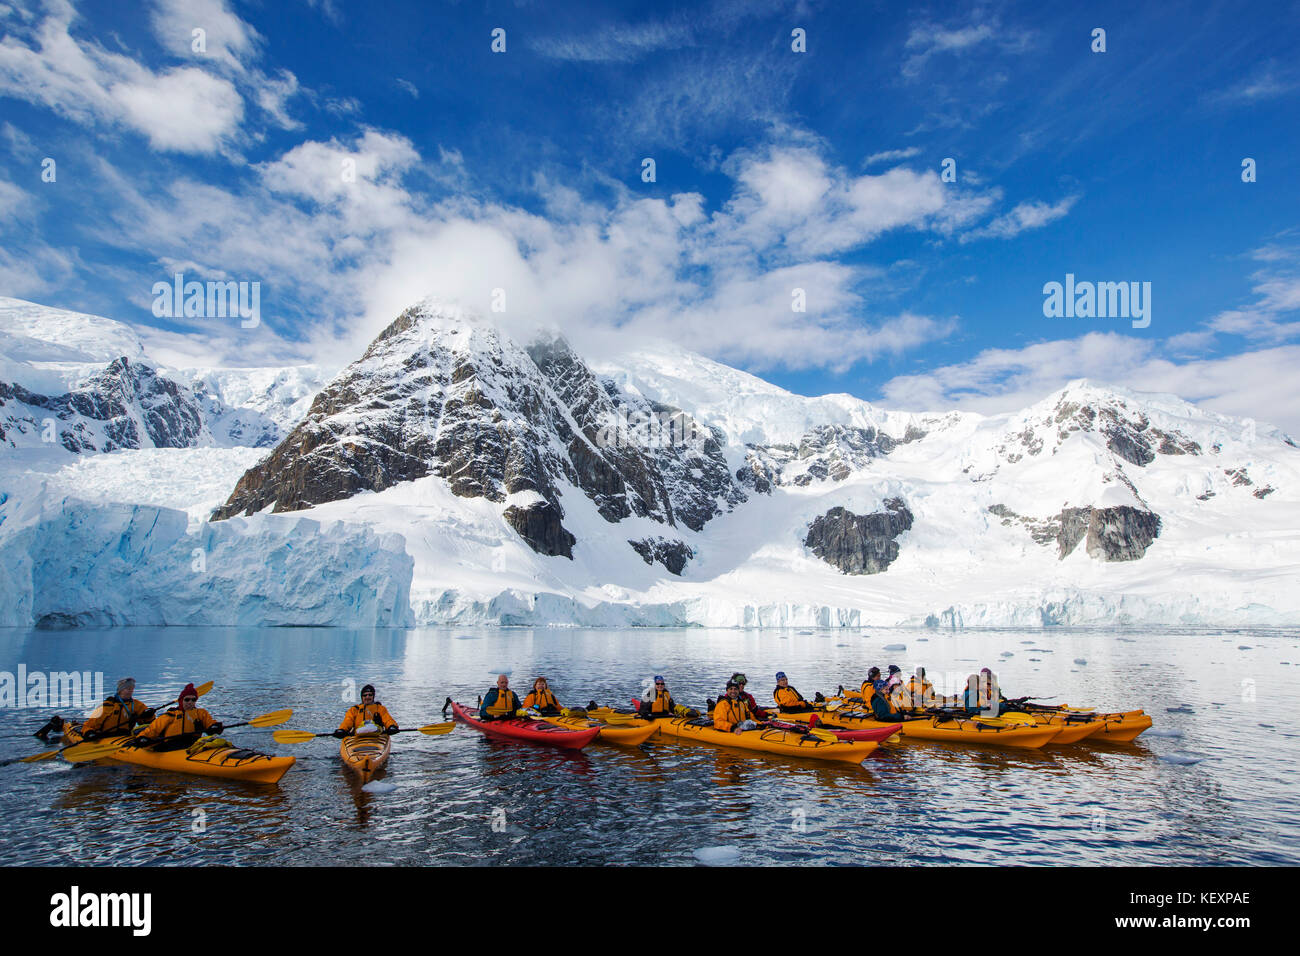 Members of an expedition cruise to Antarctica sea kayaking in Paradise Bay beneath Mount Walker on the Antarctic peninsula. The Antarctic peninsula is one of the most rapidly warming areas on the planet. Stock Photo